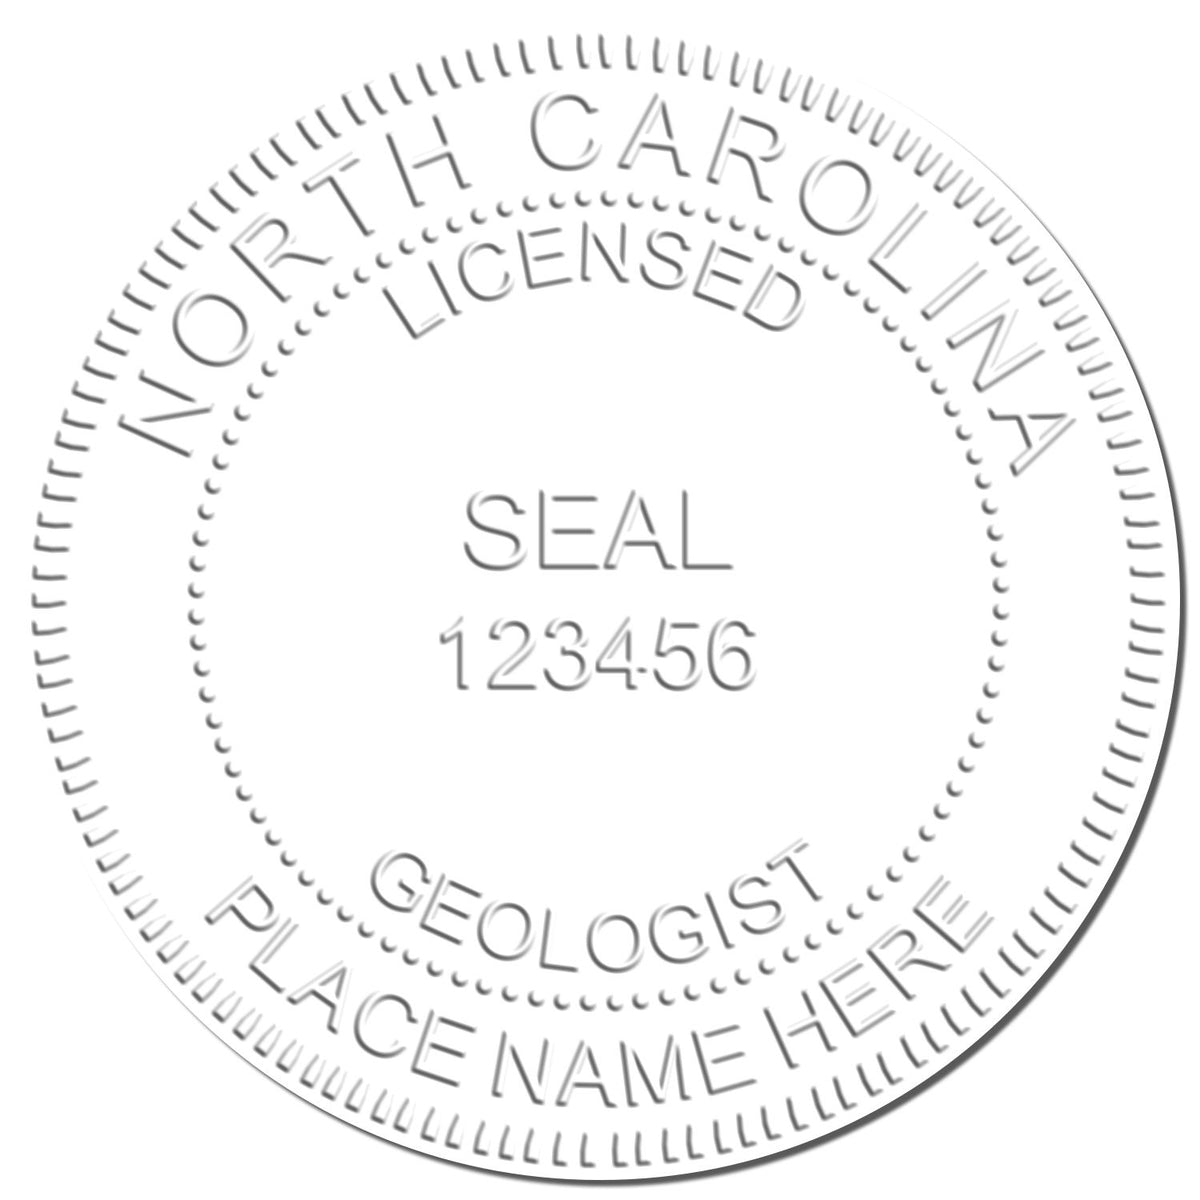 A stamped imprint of the Soft North Carolina Professional Geologist Seal in this stylish lifestyle photo, setting the tone for a unique and personalized product.